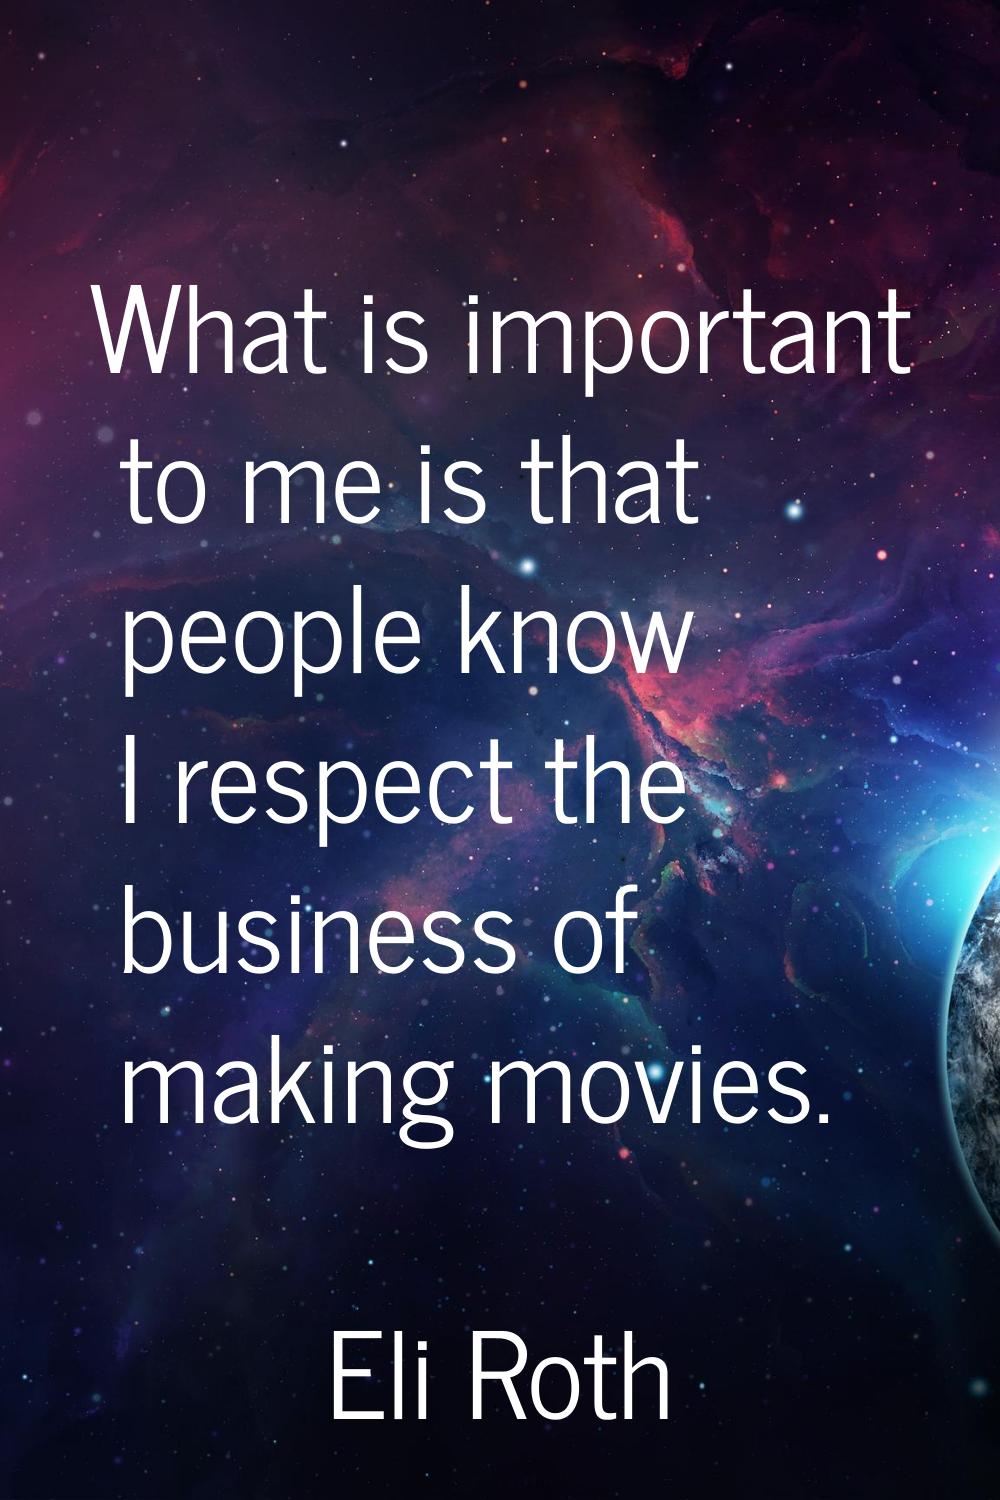 What is important to me is that people know I respect the business of making movies.